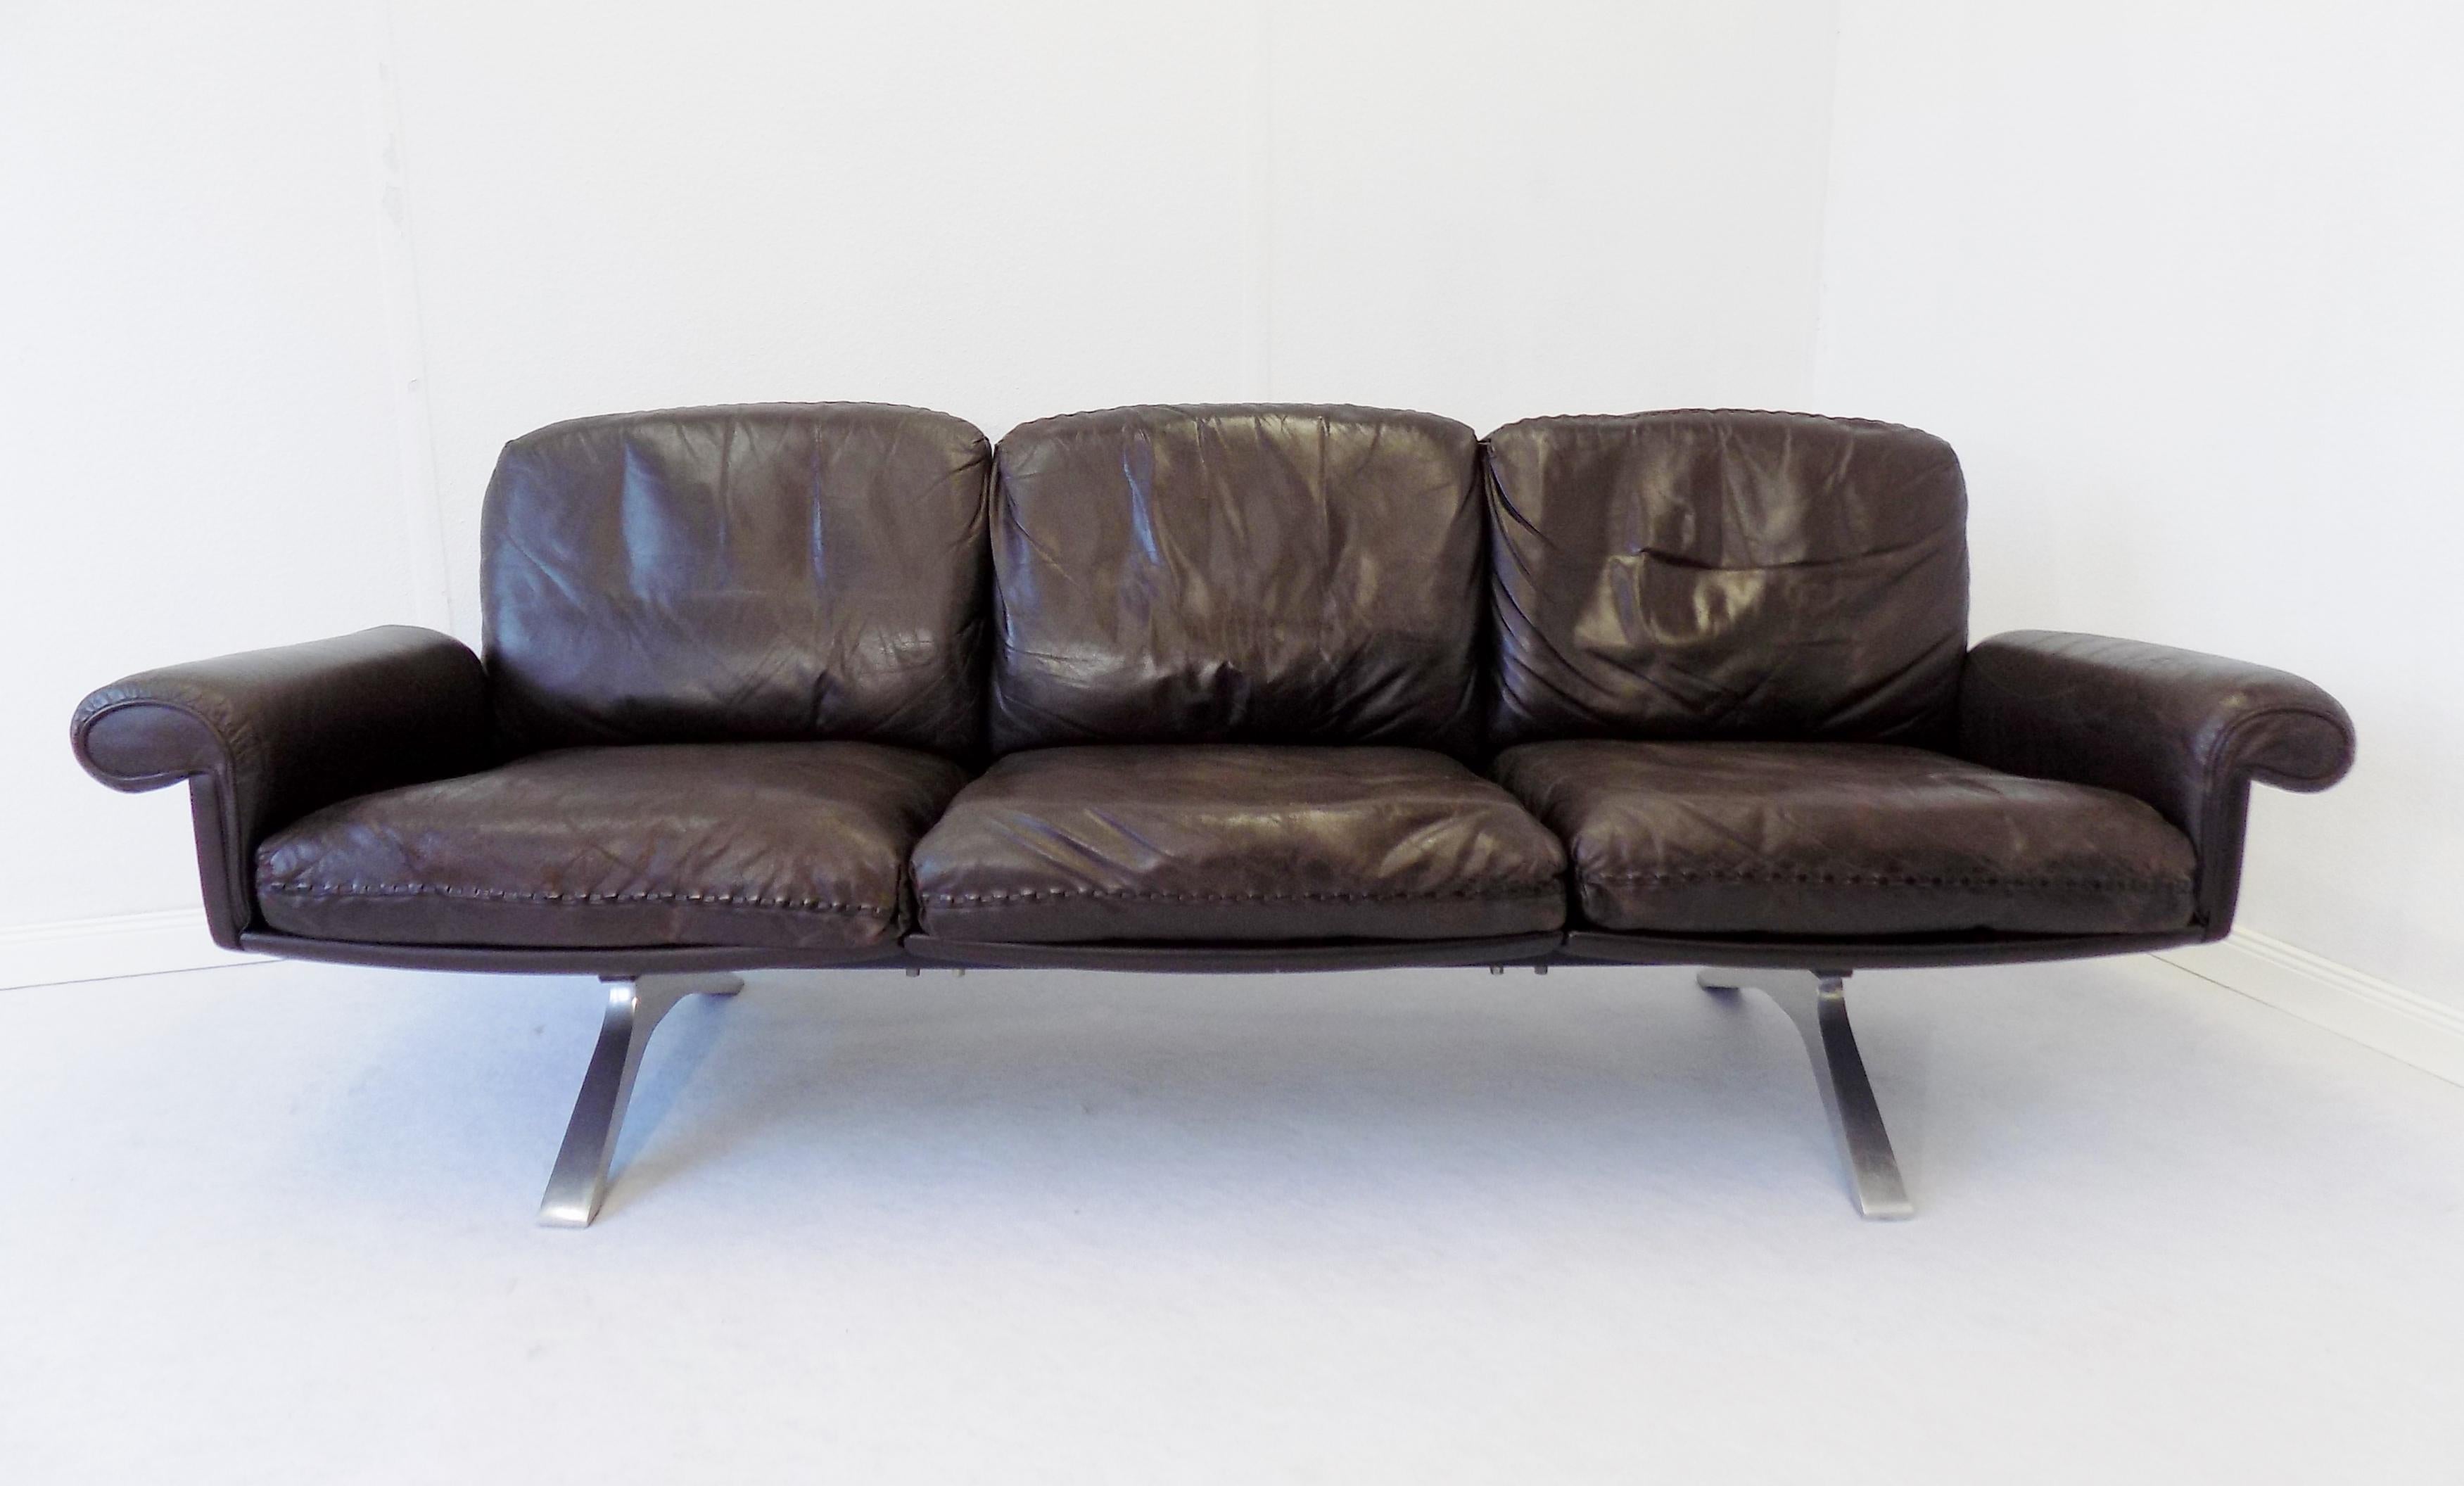 The DS 31 is a timeless design of the famous Swiss manufacturer De Sede. Since 1965 De Sede produces furniture in the highest quality. This 3-seat comes in dark brown and shows little patina on the leather. The stainless steel base is in very good